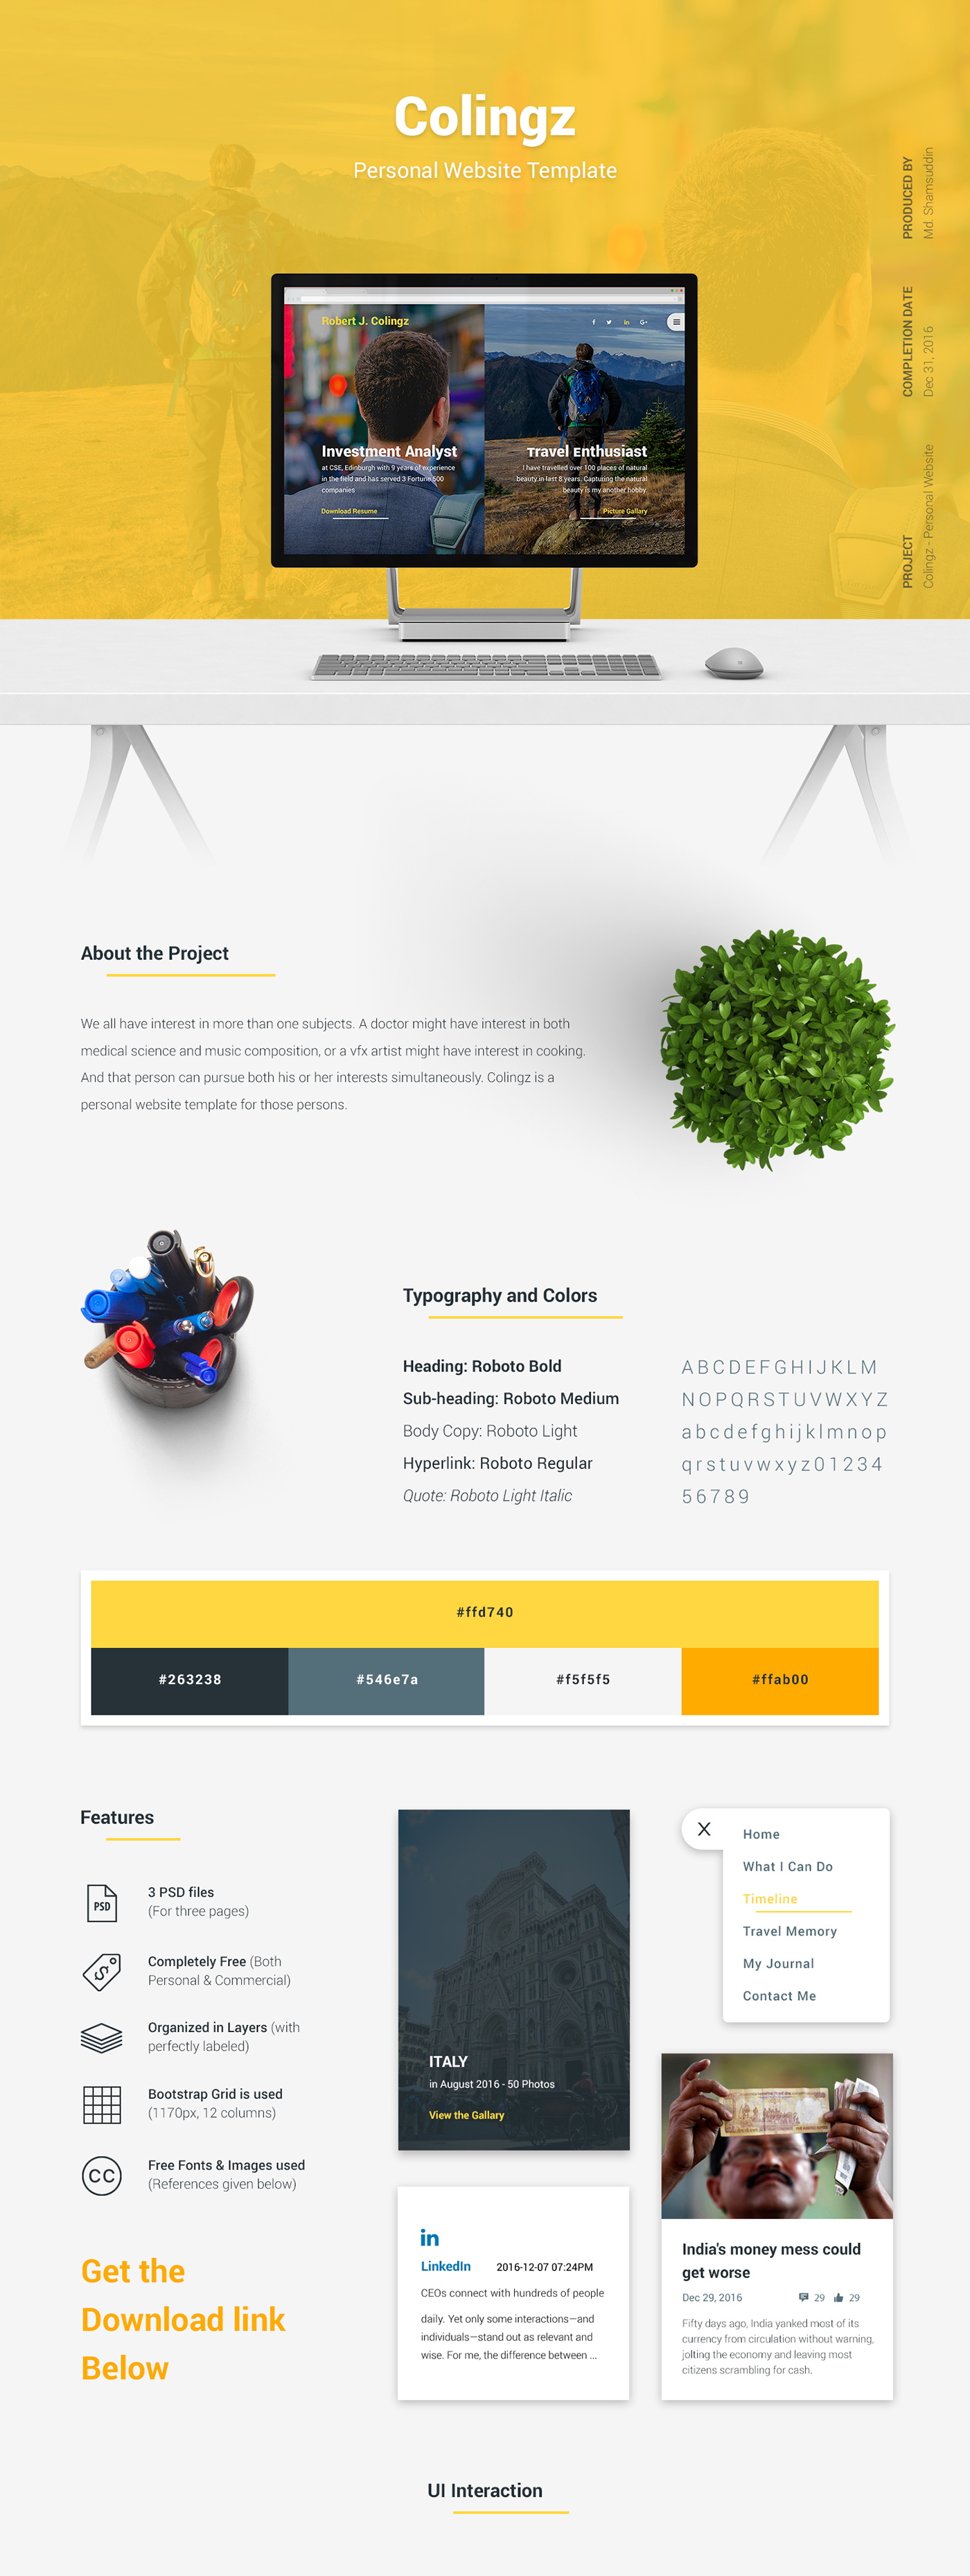 Colingz Website Template Free Psd On Behance